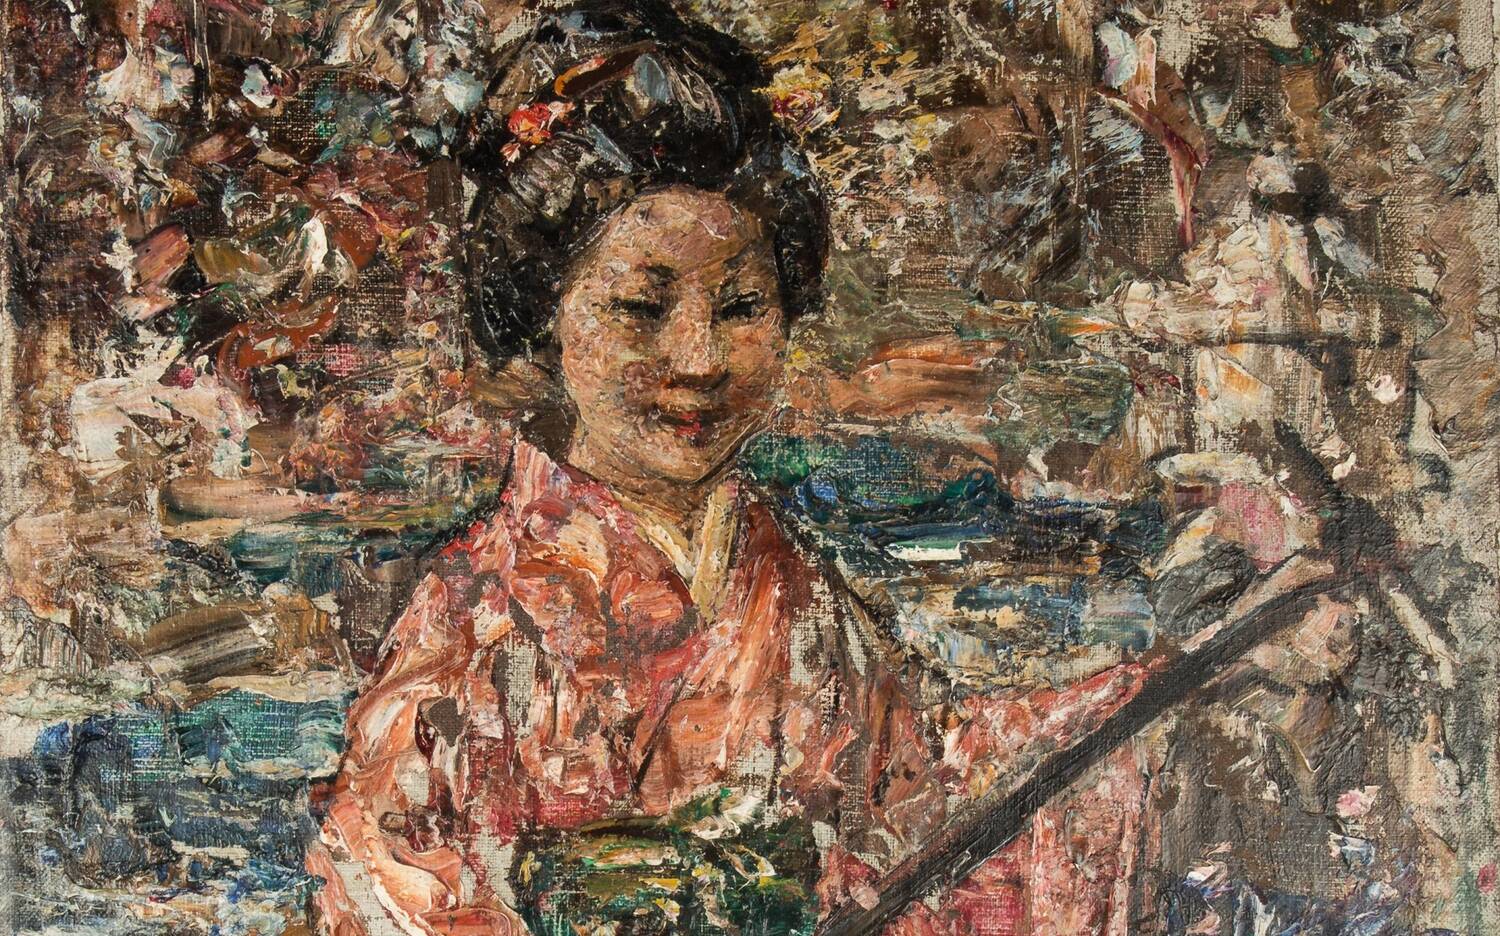 An oil painting of a Japanese woman playing a stringed instrument. Her hair is arranged on top of her head and she is wearing a pink kimono style garment.